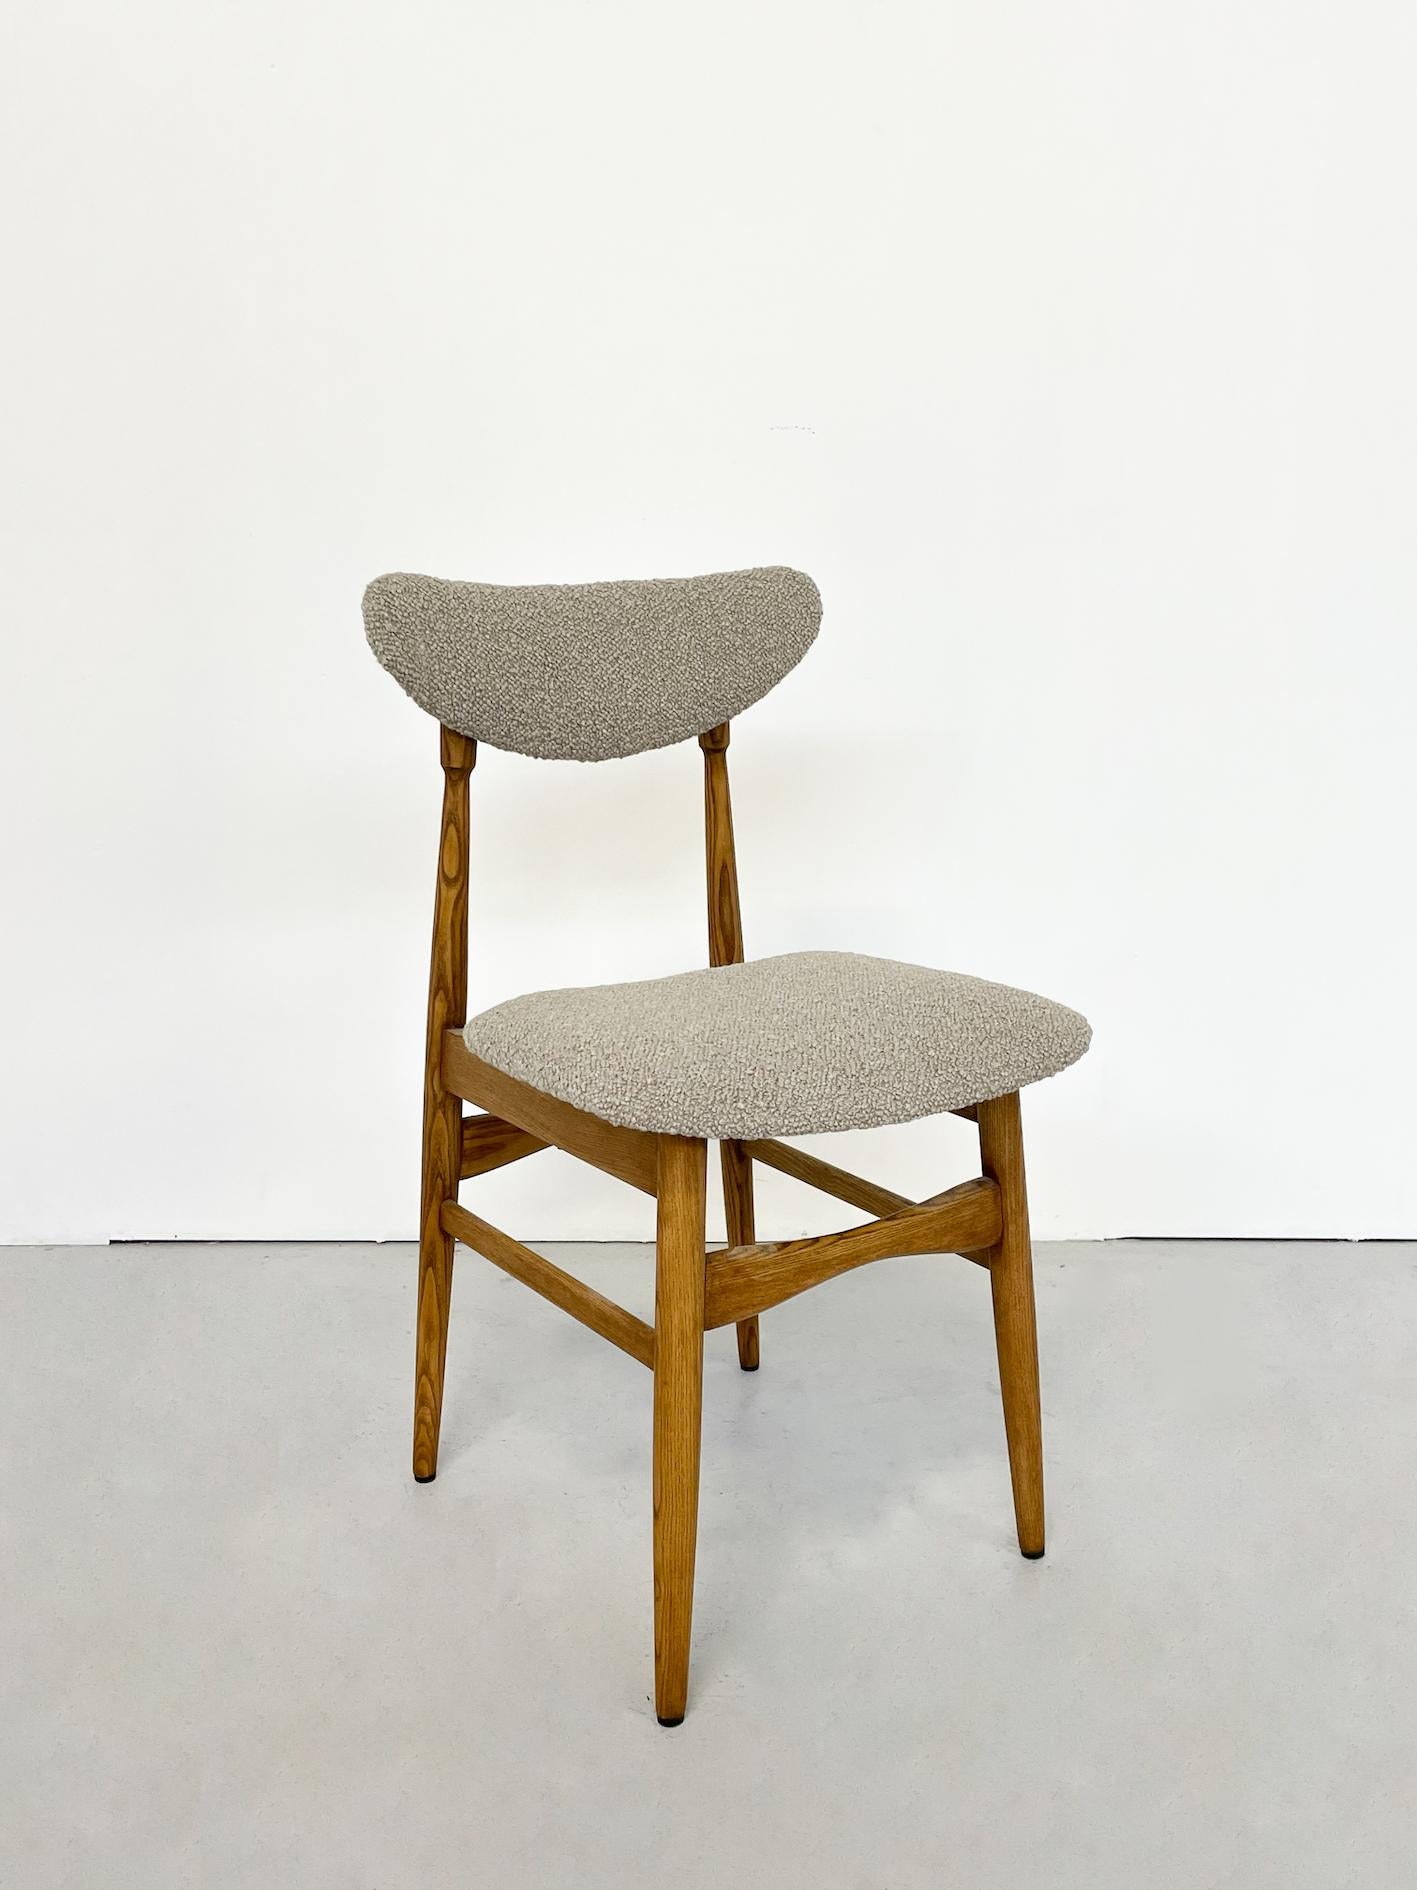 Tissu The Modernity Set of 12 Chairs, Italie, 1960s - New Upholstery en vente